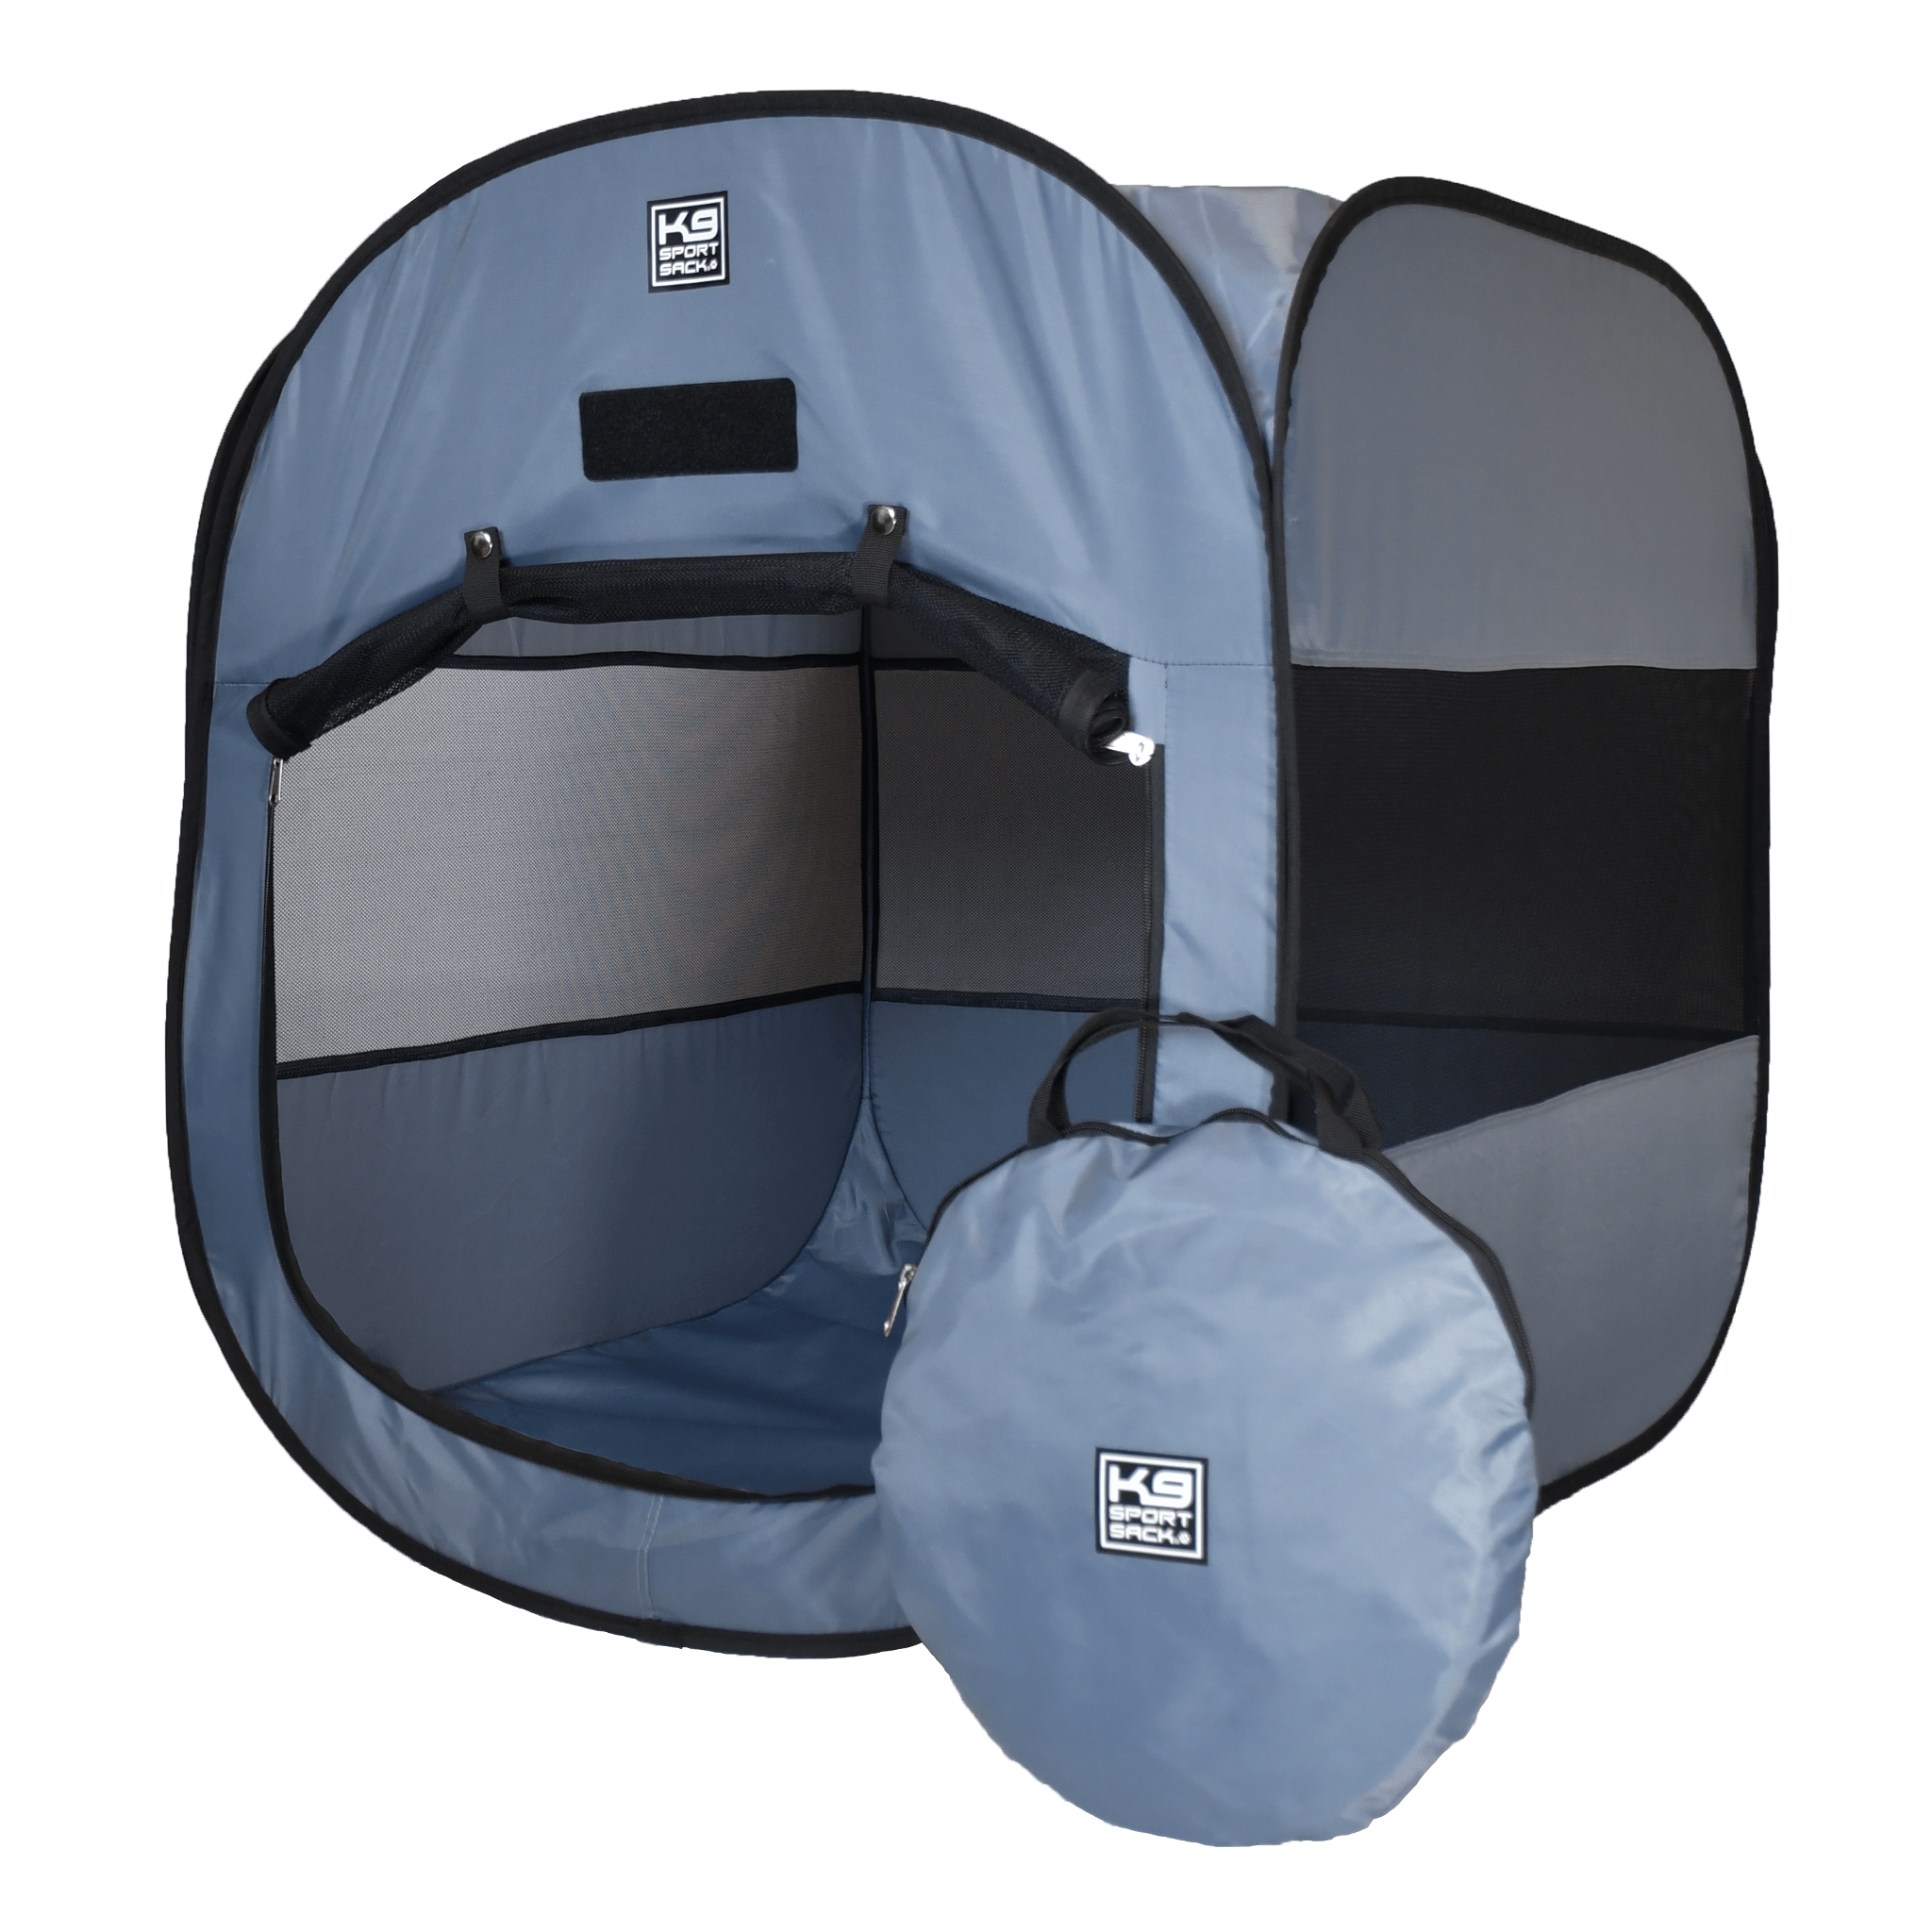 Large_Tent_and_Case_267e2b13-5a3c-4215-aa2b-70161d0054ac.png